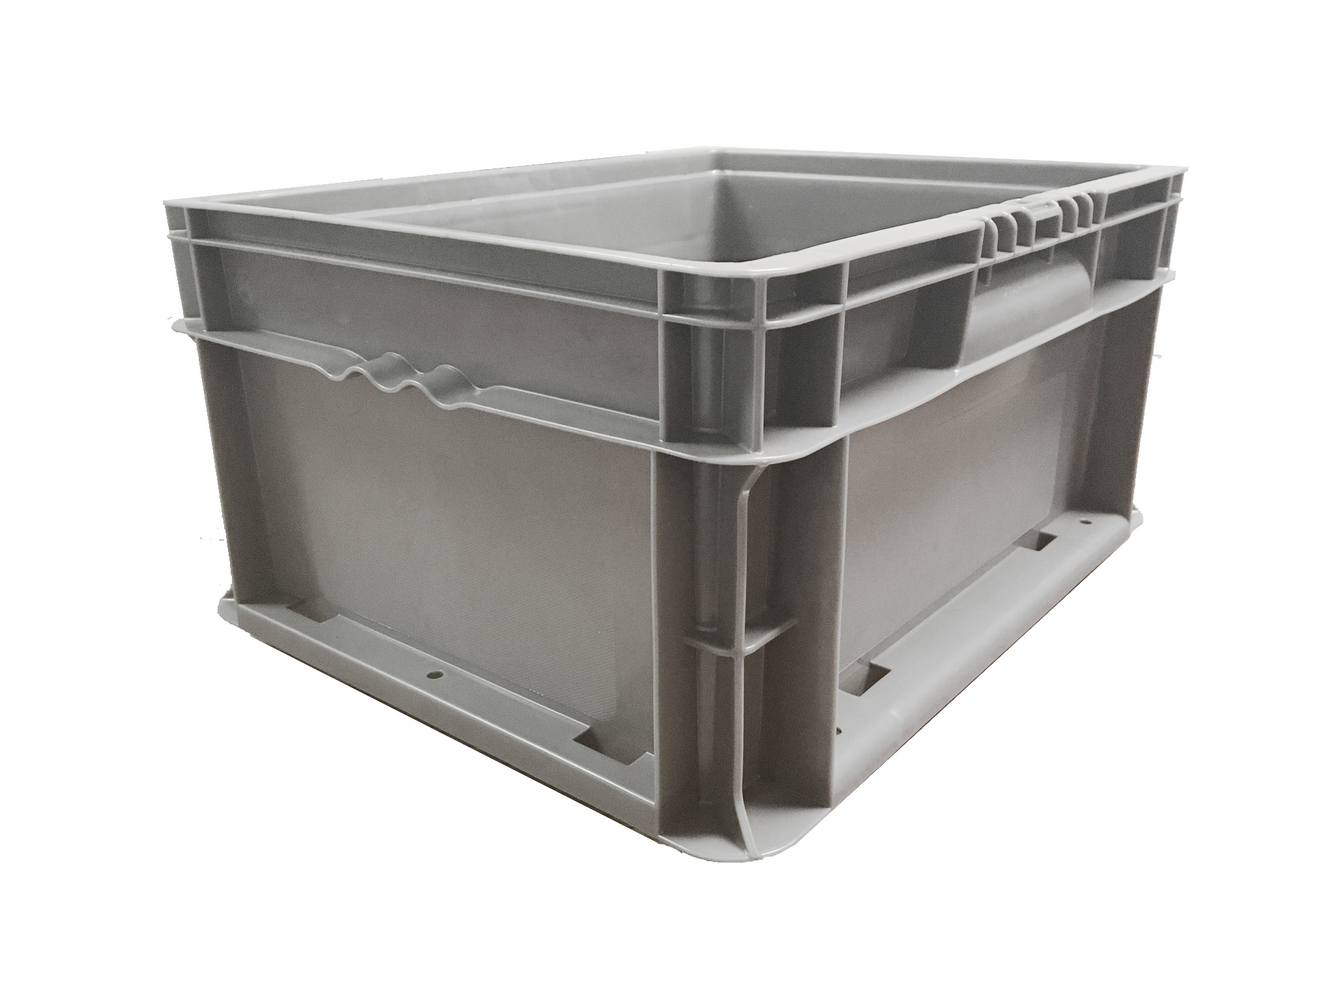 15 x 12 x 07 – Straight Wall Handheld Container